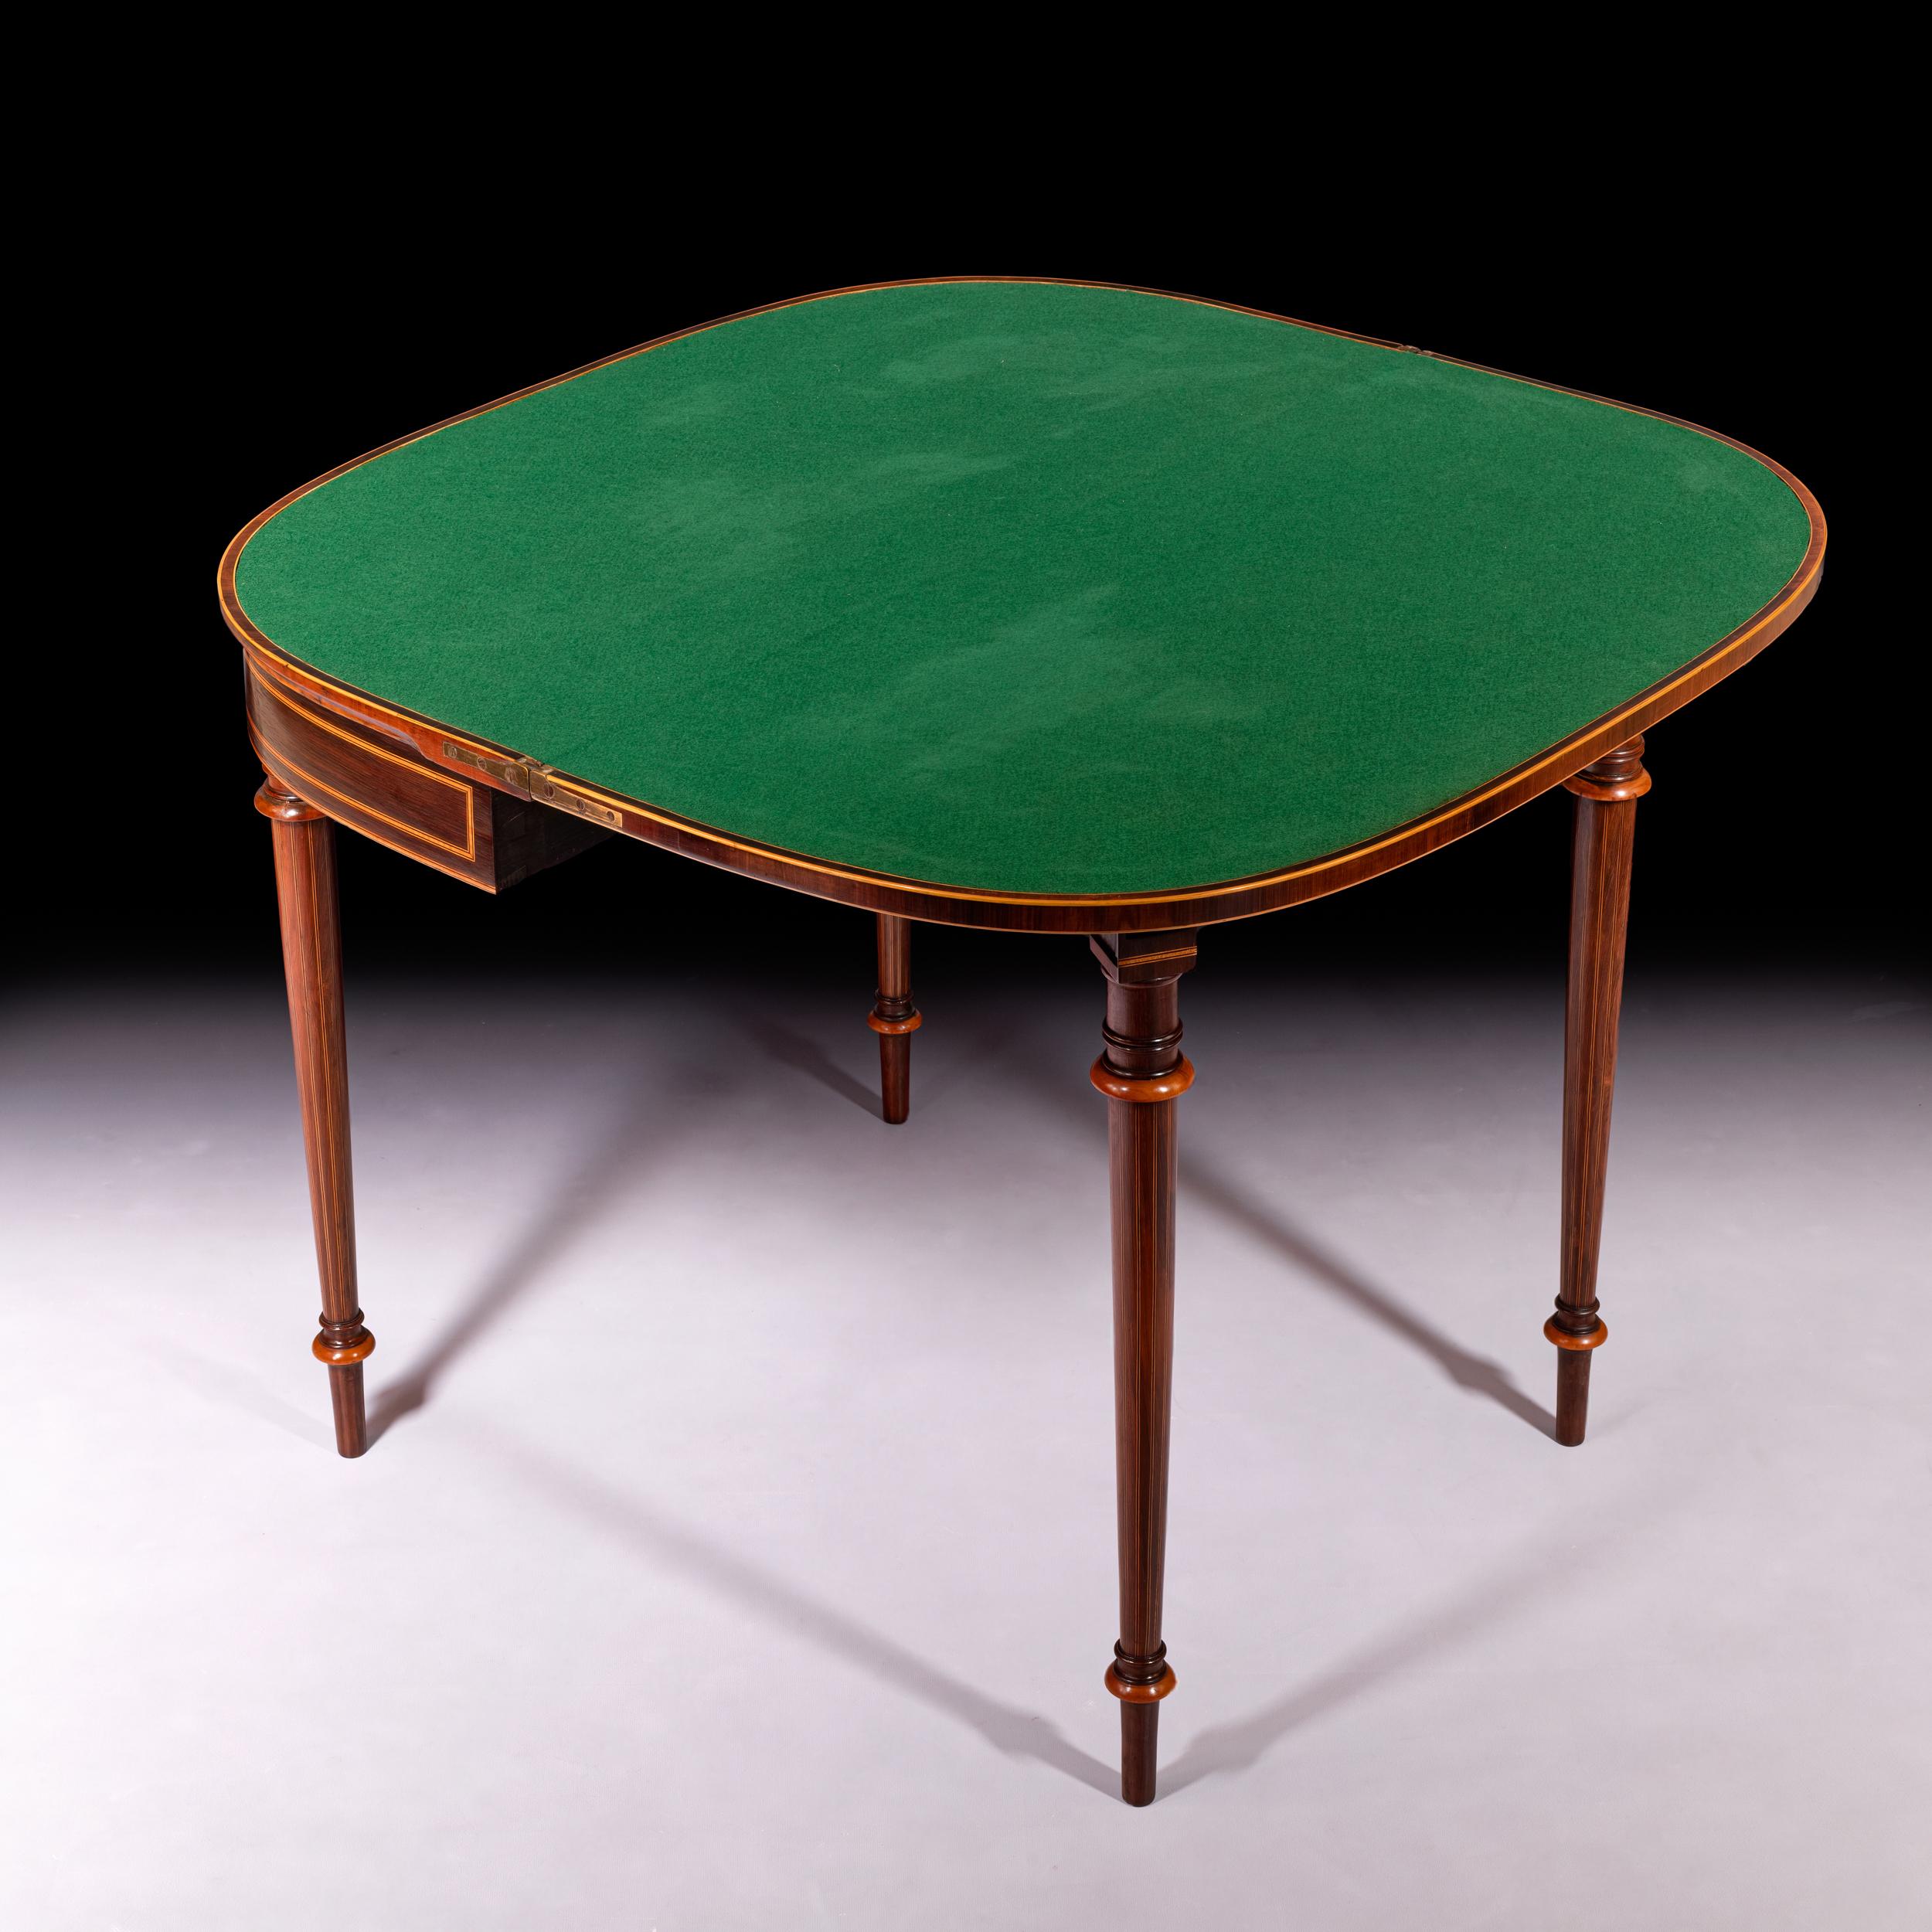 Pair Of Early 19th Century English Regency Period  Games/Card Tables For Sale 4